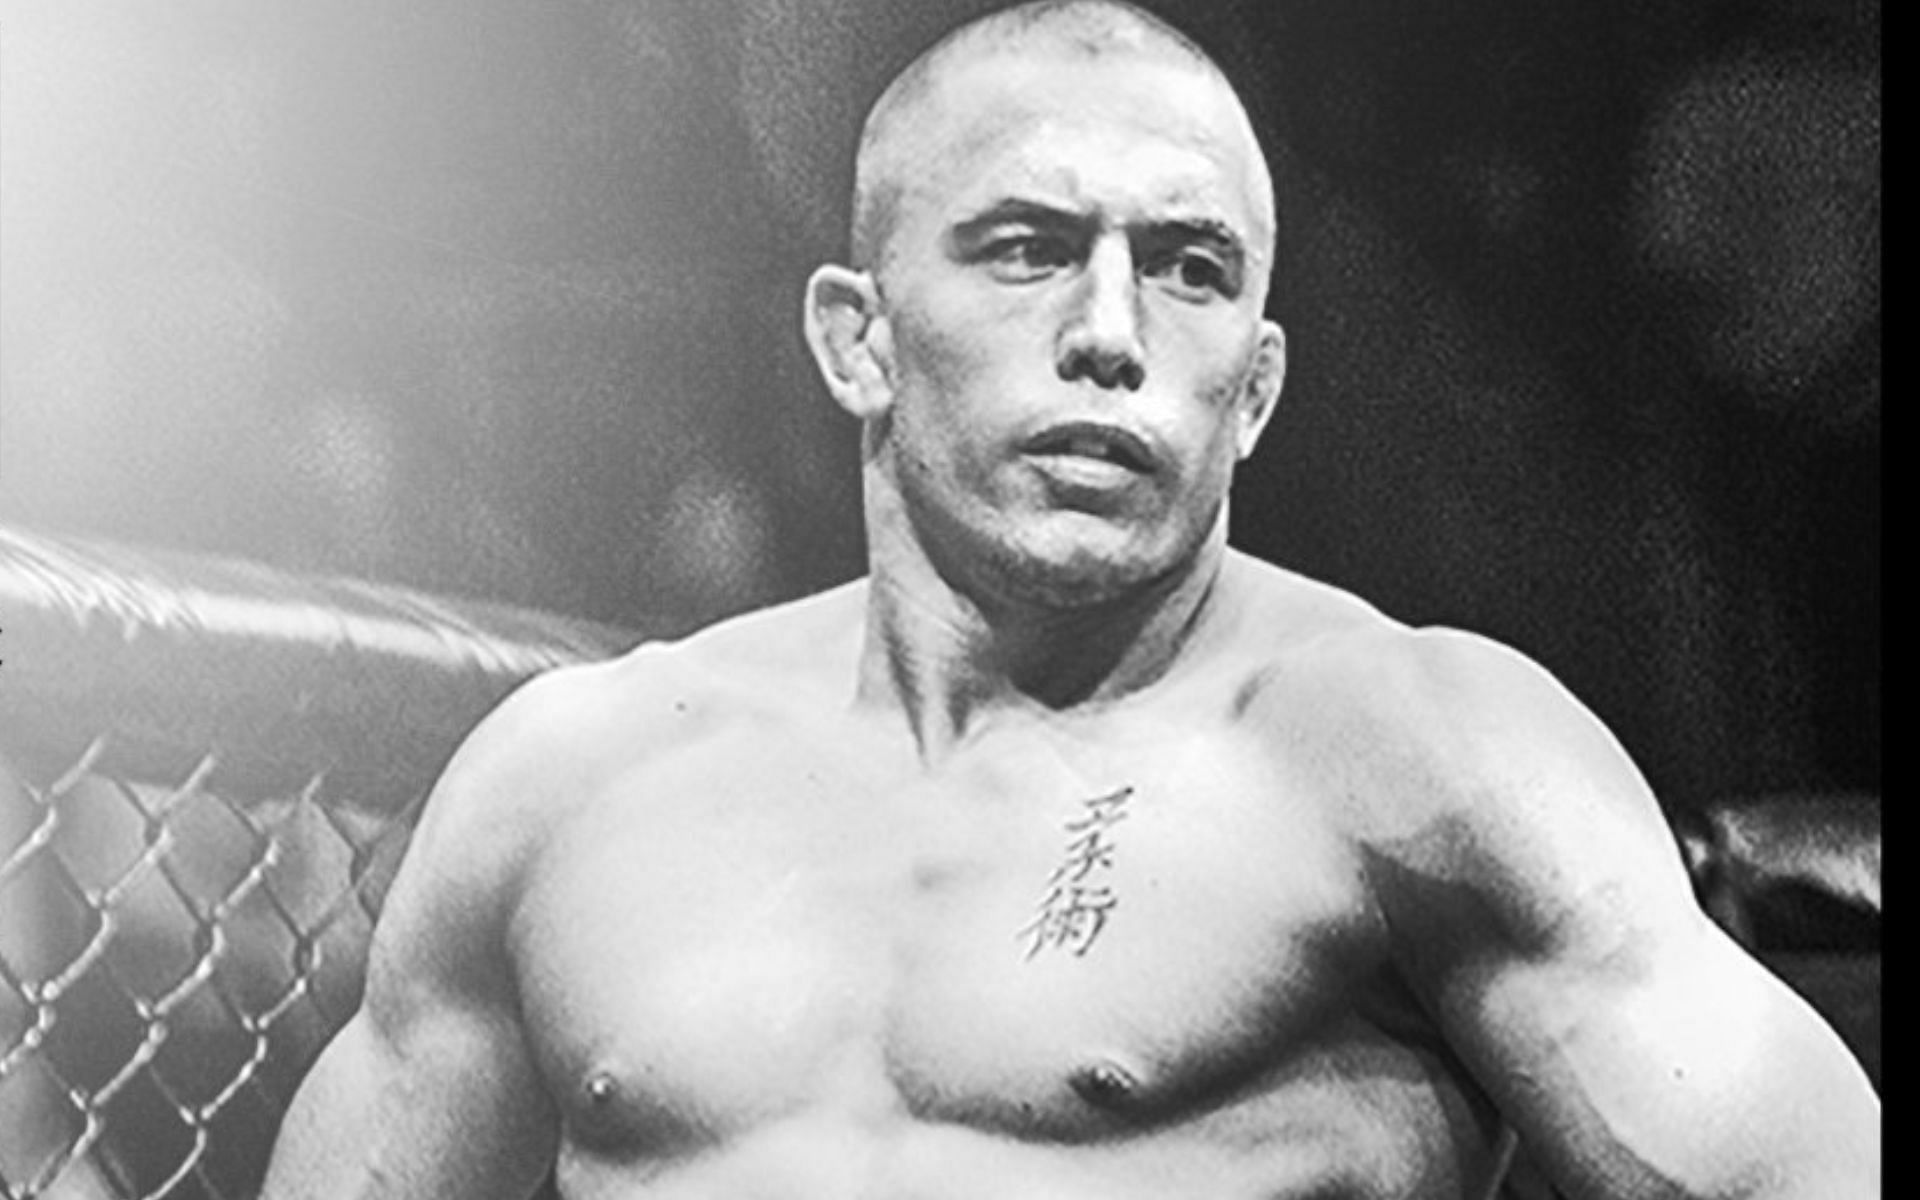 The great Georges St-Pierre